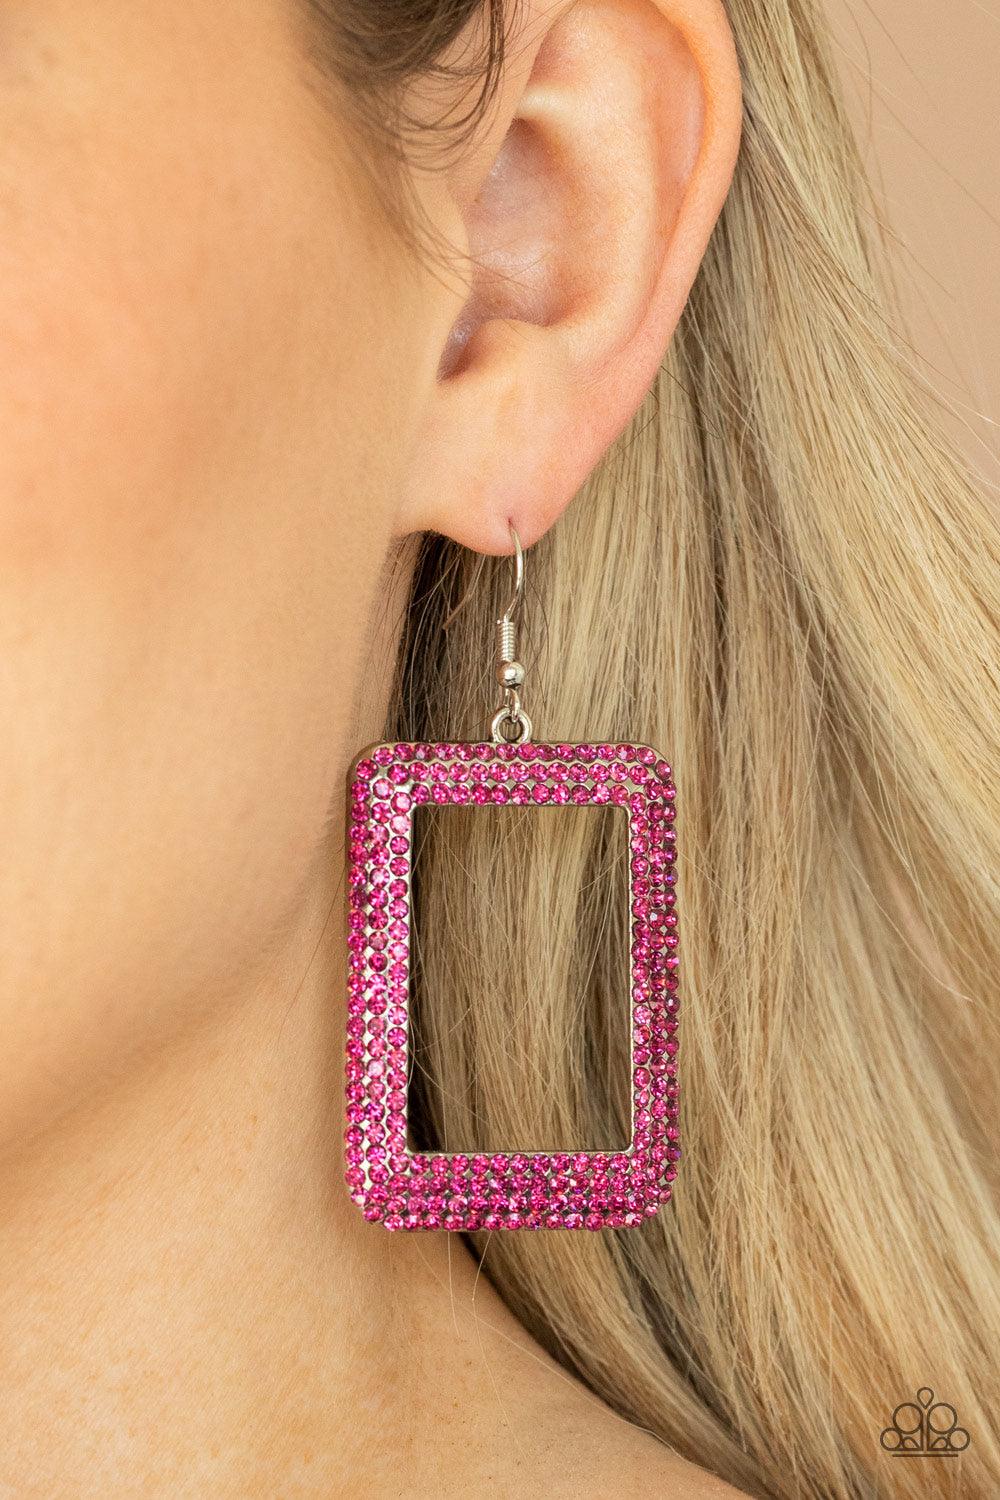 Paparazzi Accessories World FRAME-ous - Pink Bordered in rows of glittery pink rhinestones, an oversized silver rectangular frame swings from the ear for a fashionable finish. Earring attaches to a standard fishhook fitting. Sold as one pair of earrings.